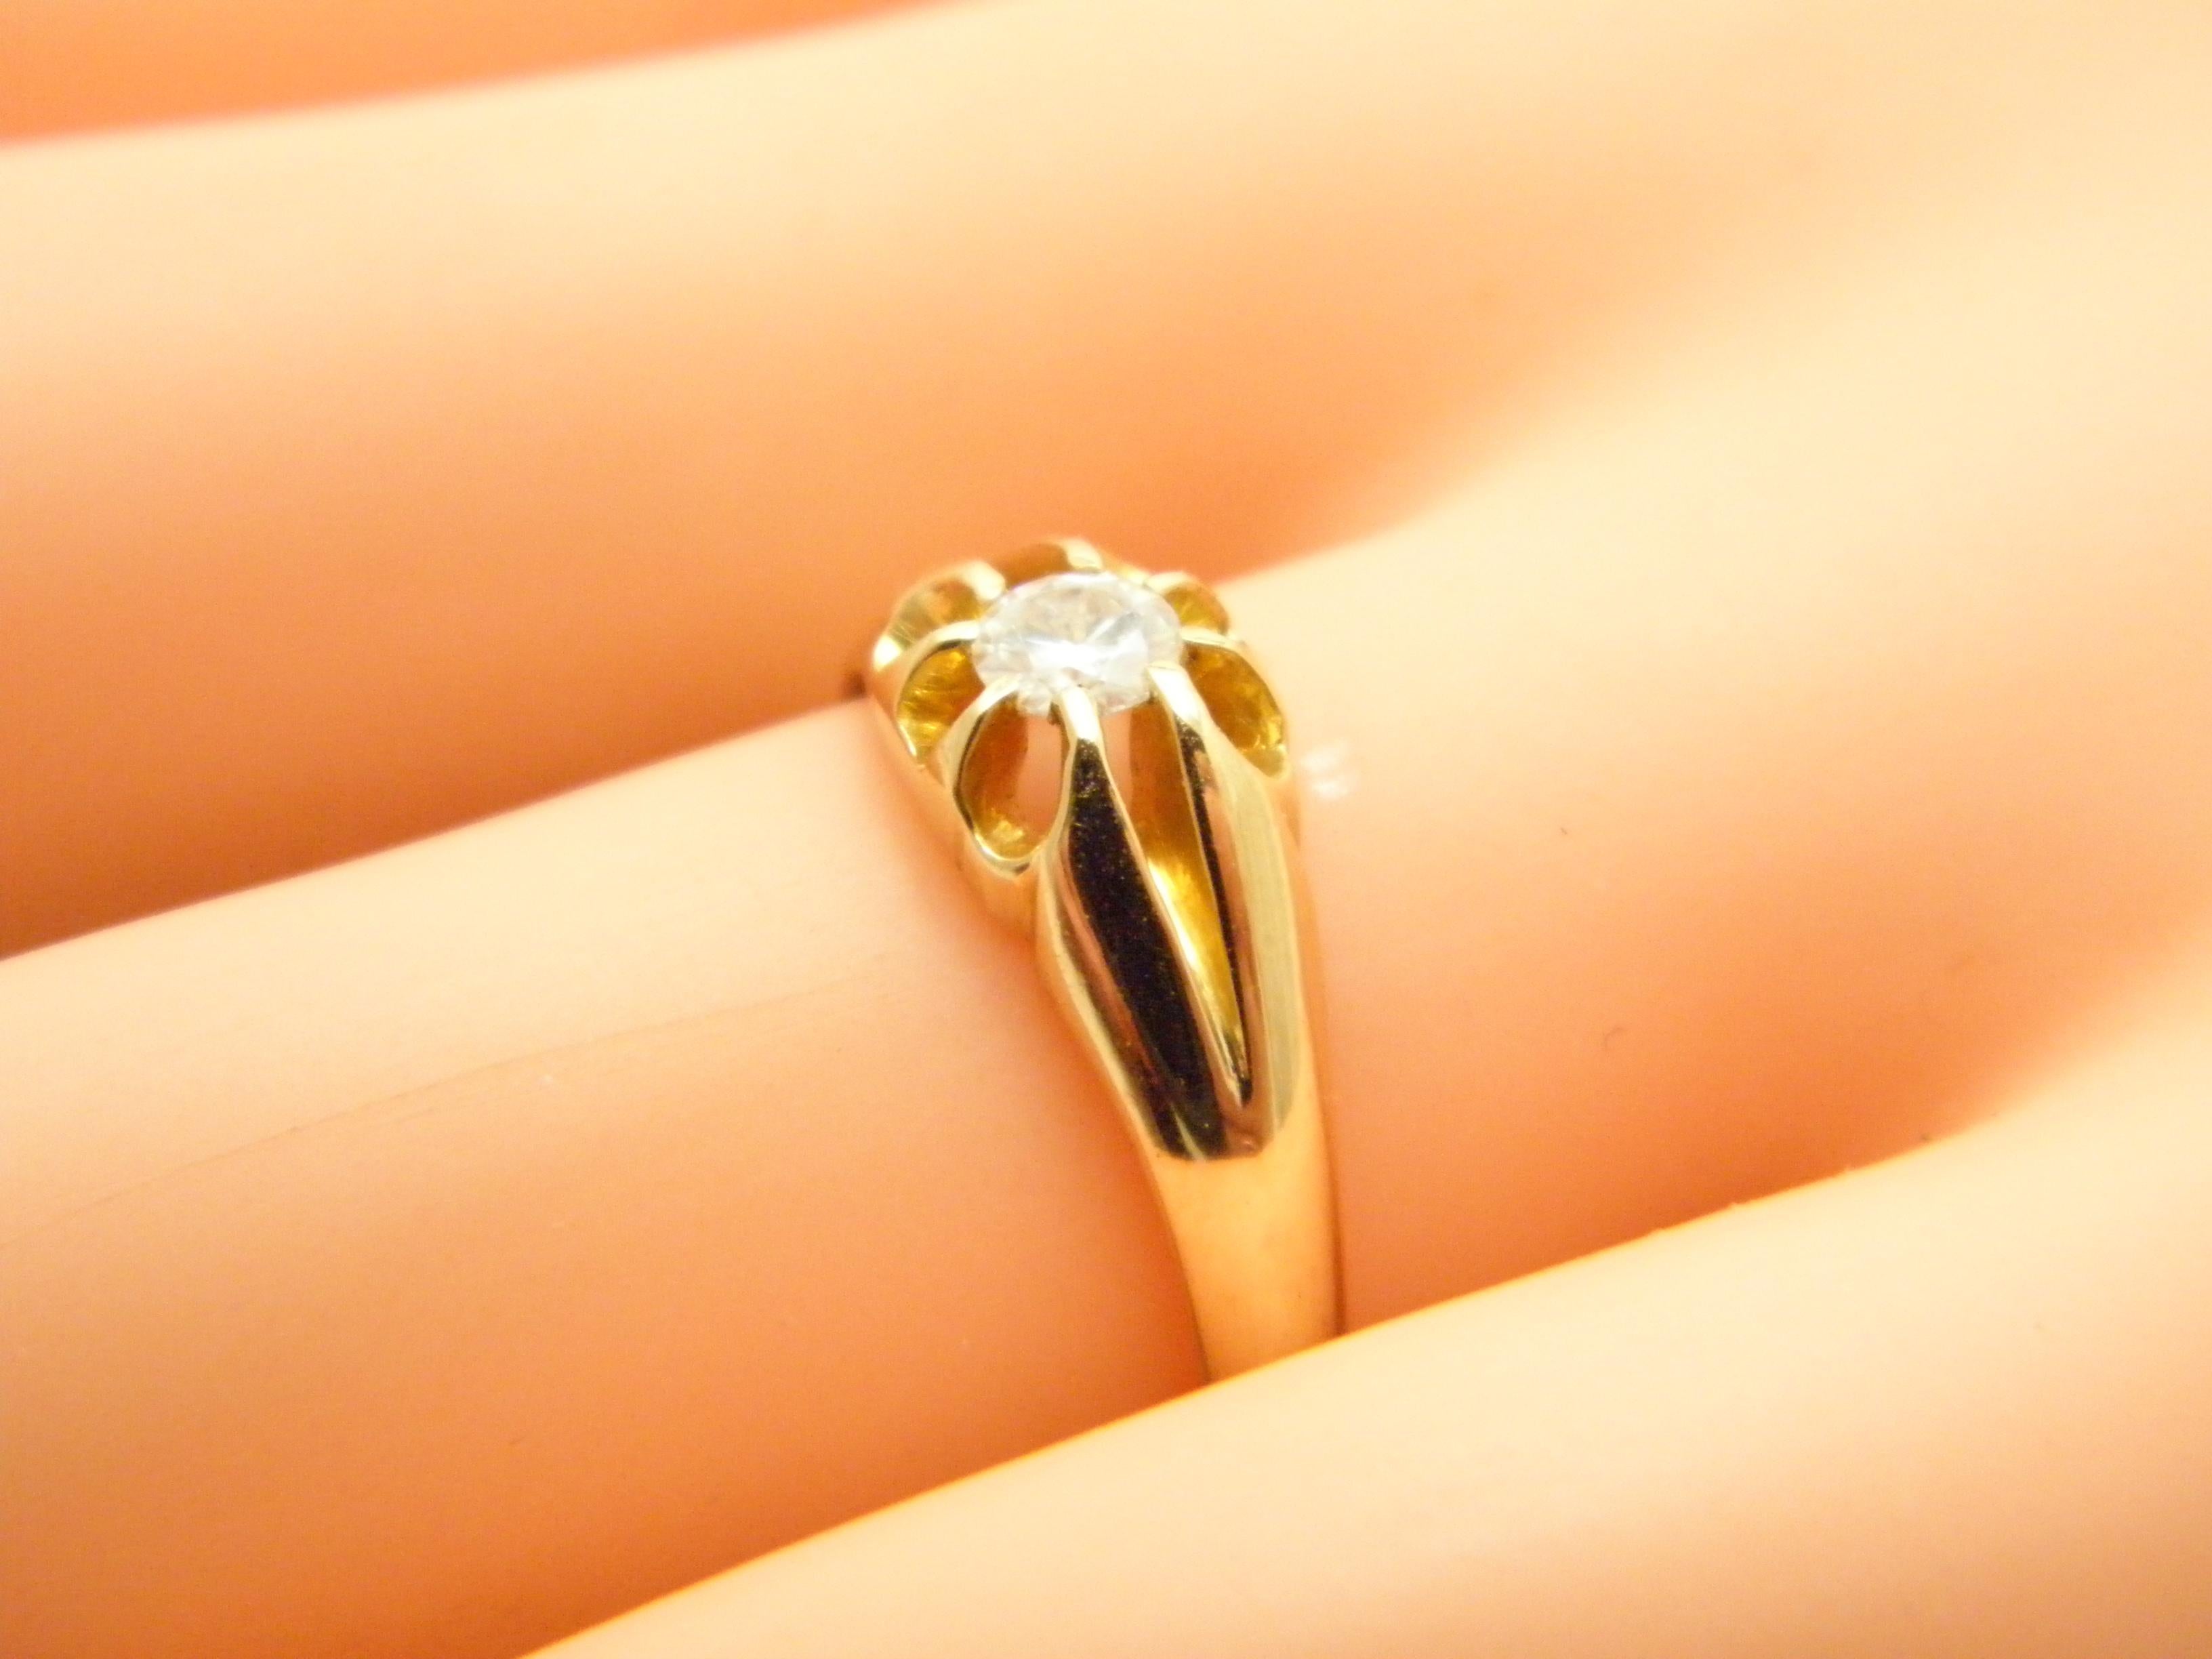 Antique 18ct Gold 0.33Cttw Diamond Solitaire Gypsy Ring Size N 6.75 750 Purity For Sale 2